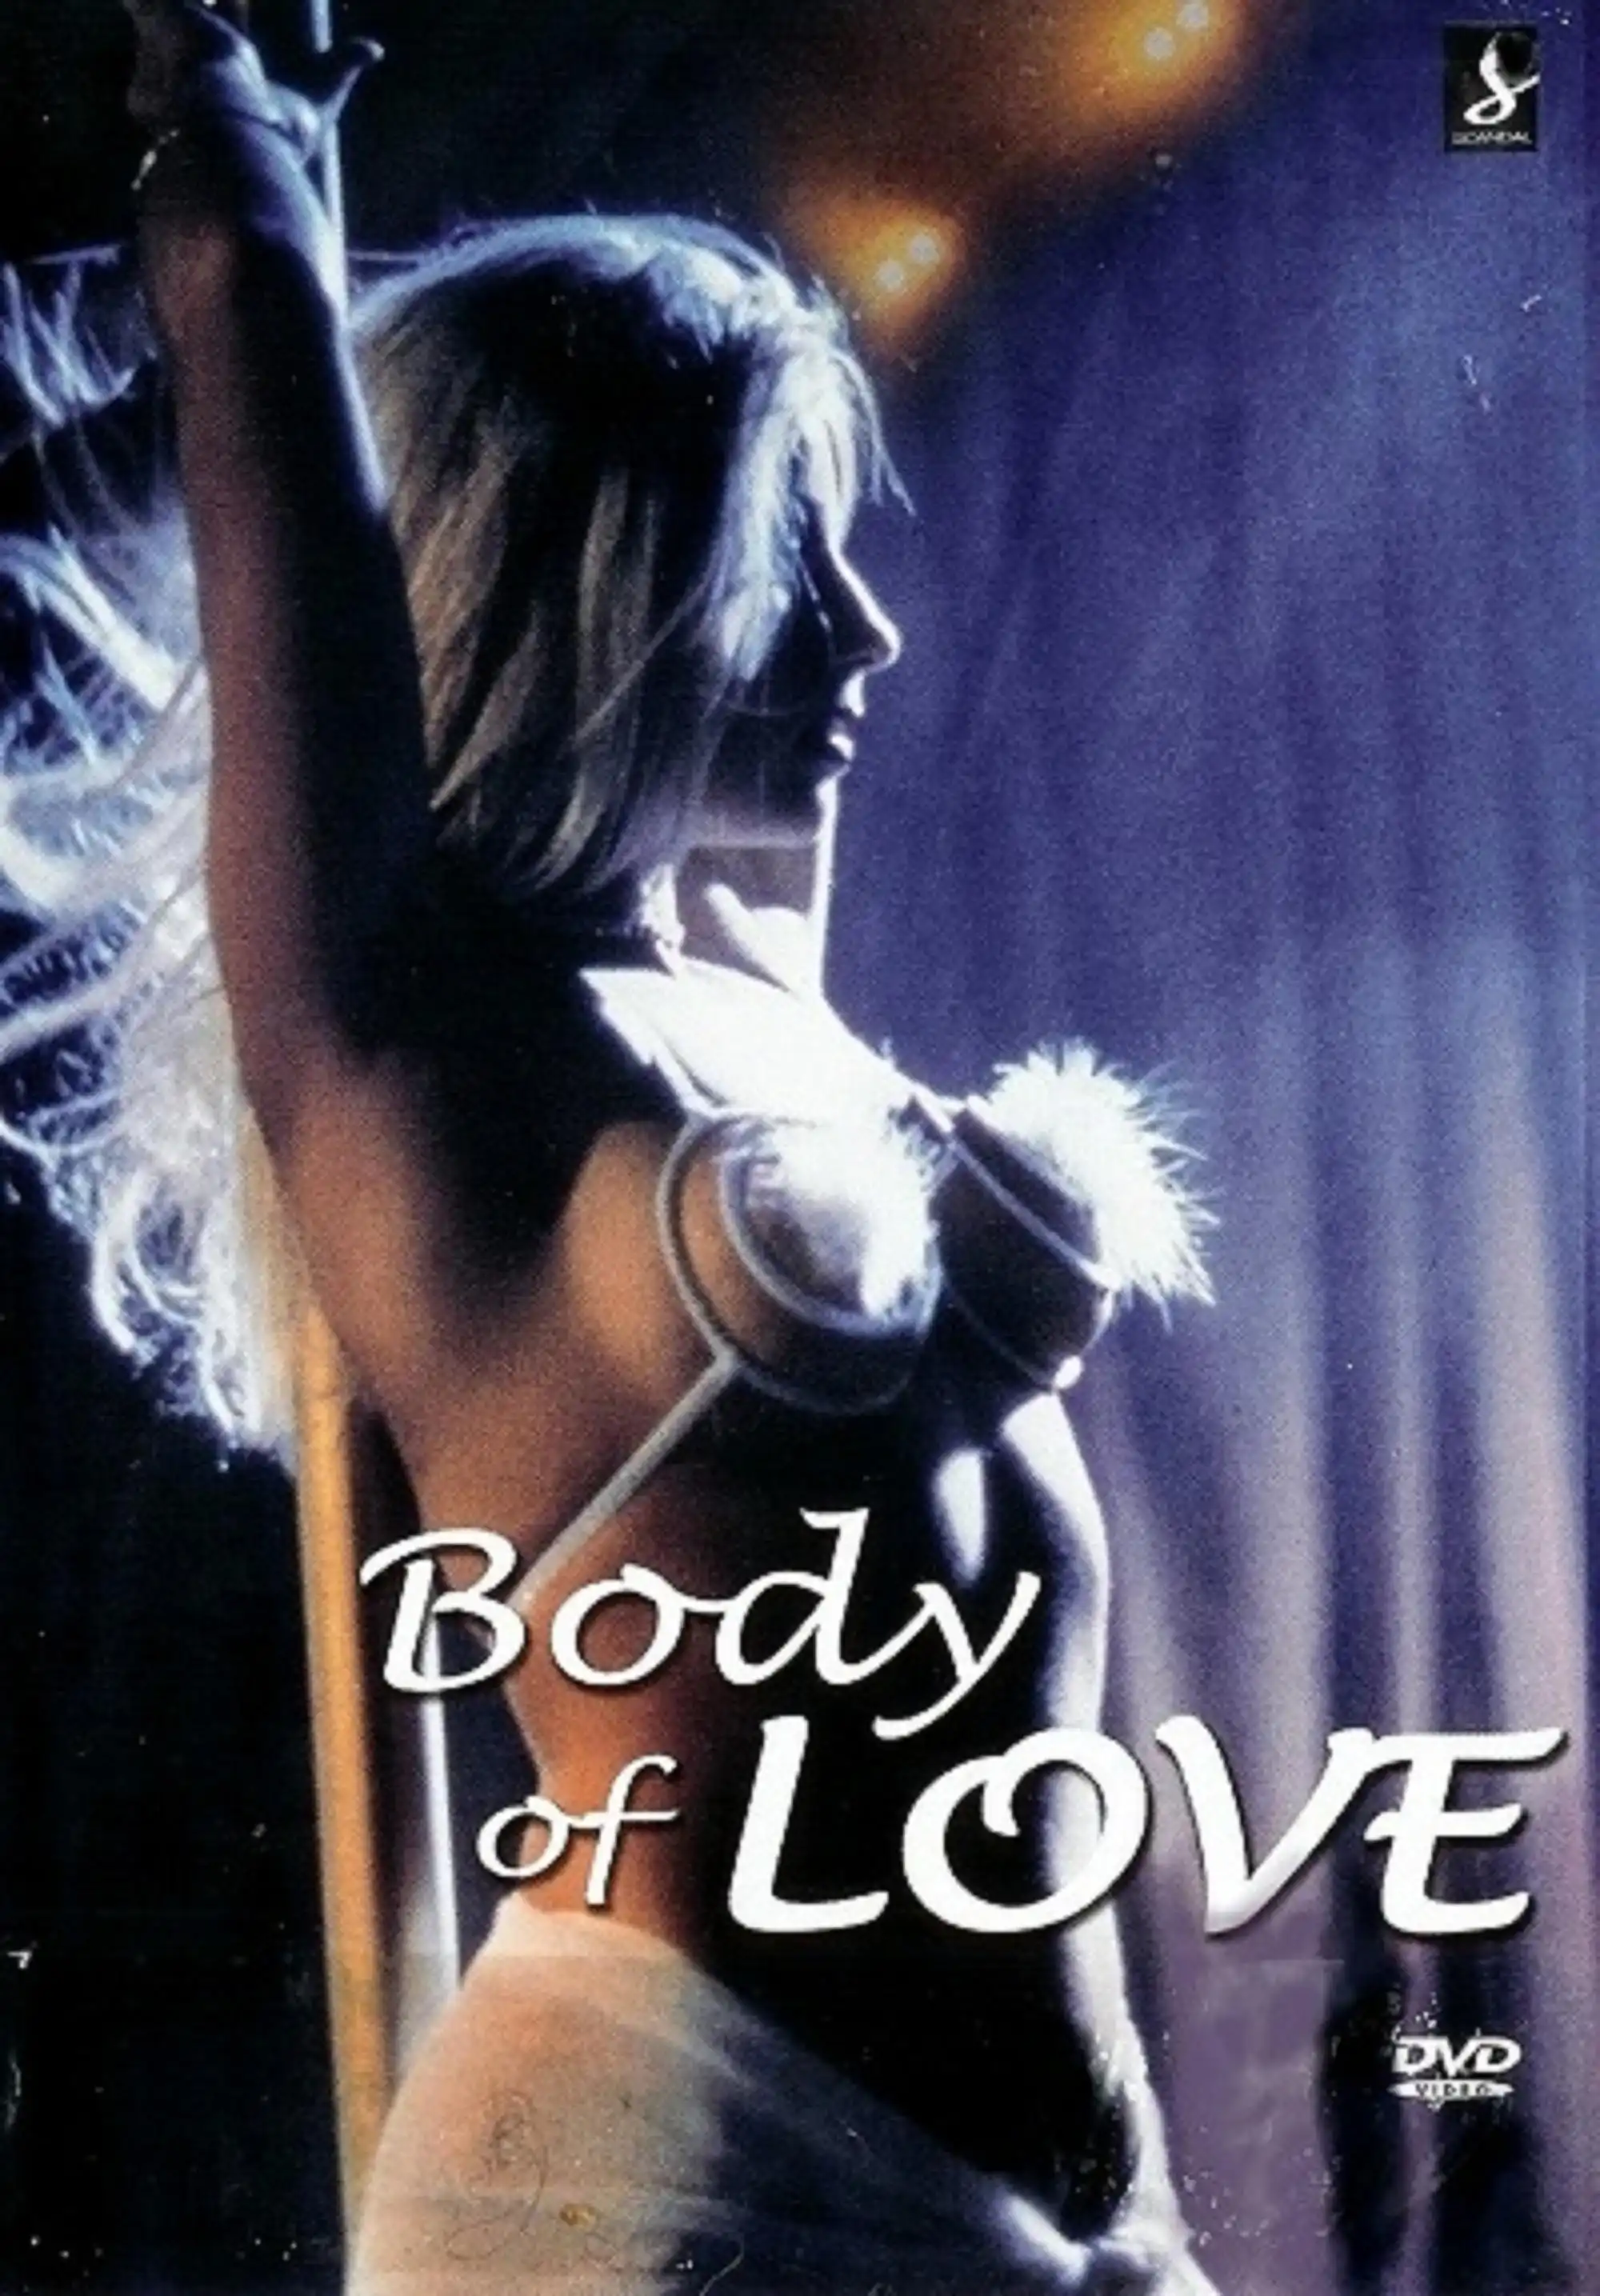 Watch and Download Scandal: Body of Love 4